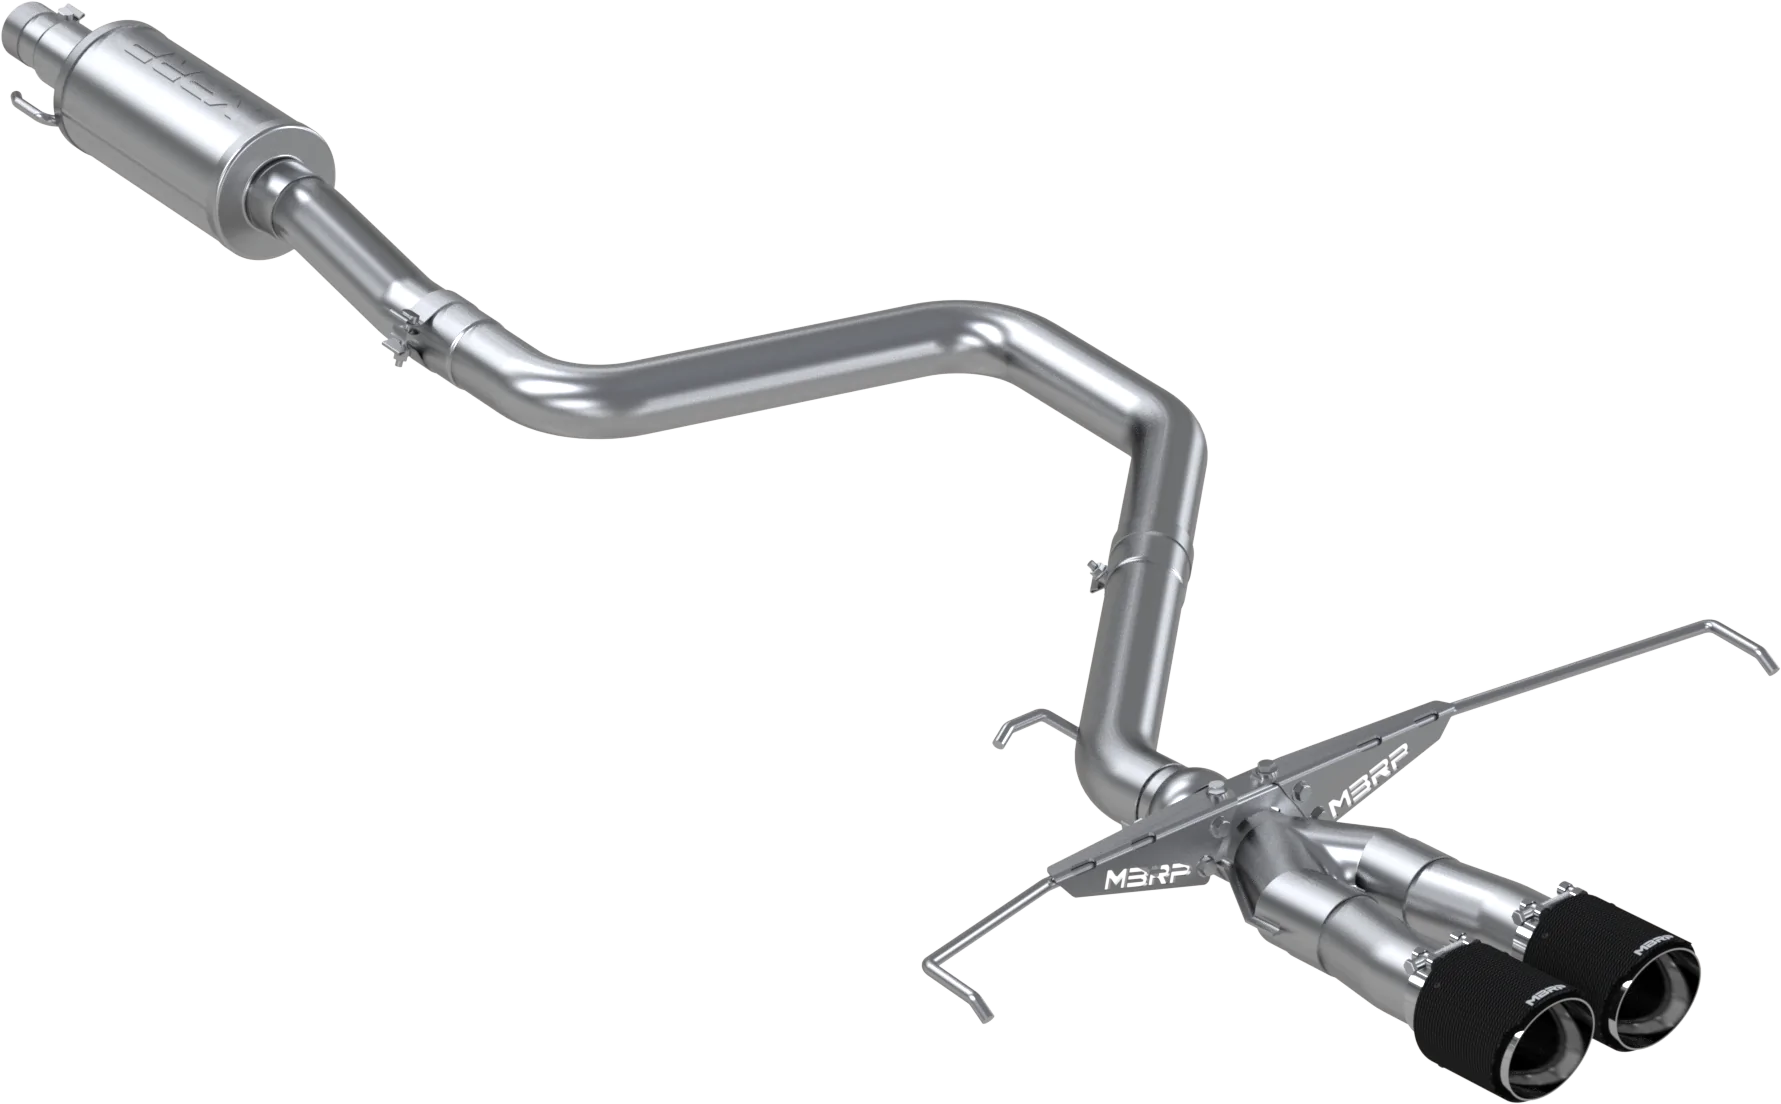 MBRP 3-Inch Armor Pro Race Profile Dual Exhaust (19+ Veloster)